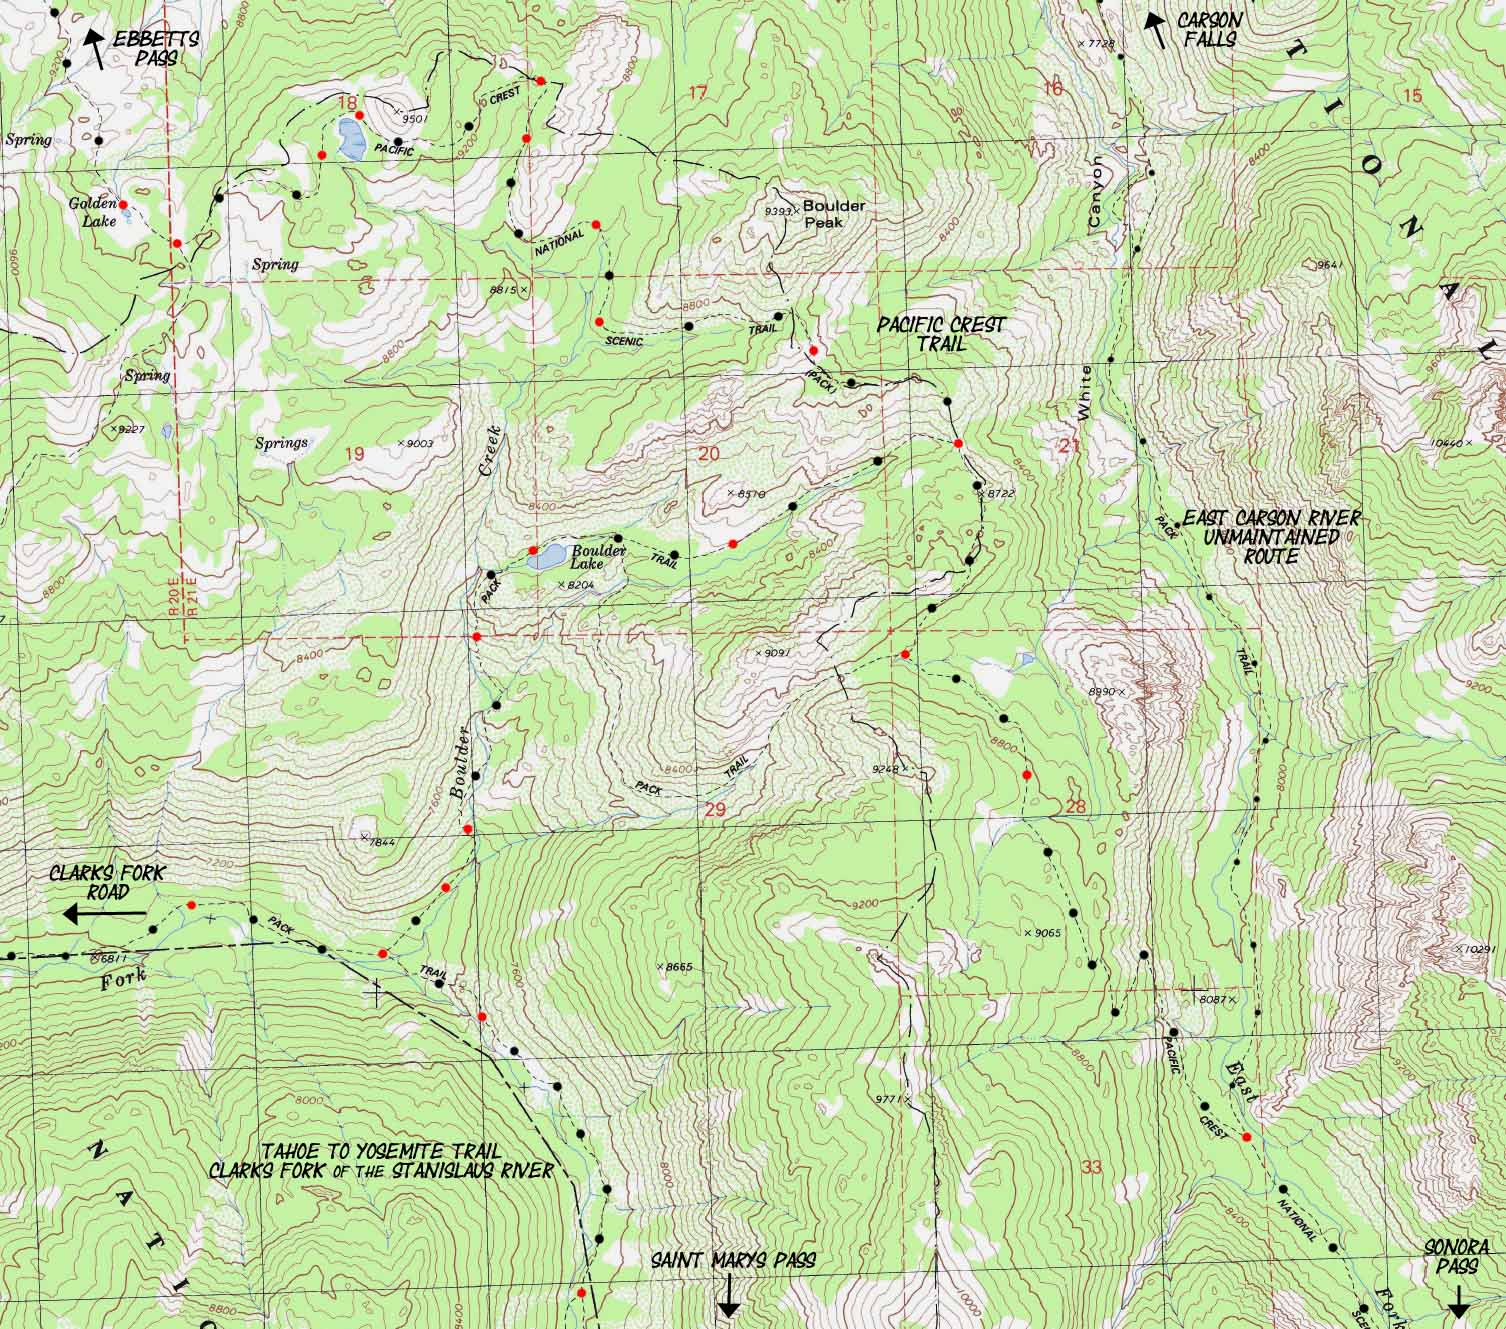 Boulder Creek backpacking map connecting Tahoe to Yosemite with Pacific Crest Trail.